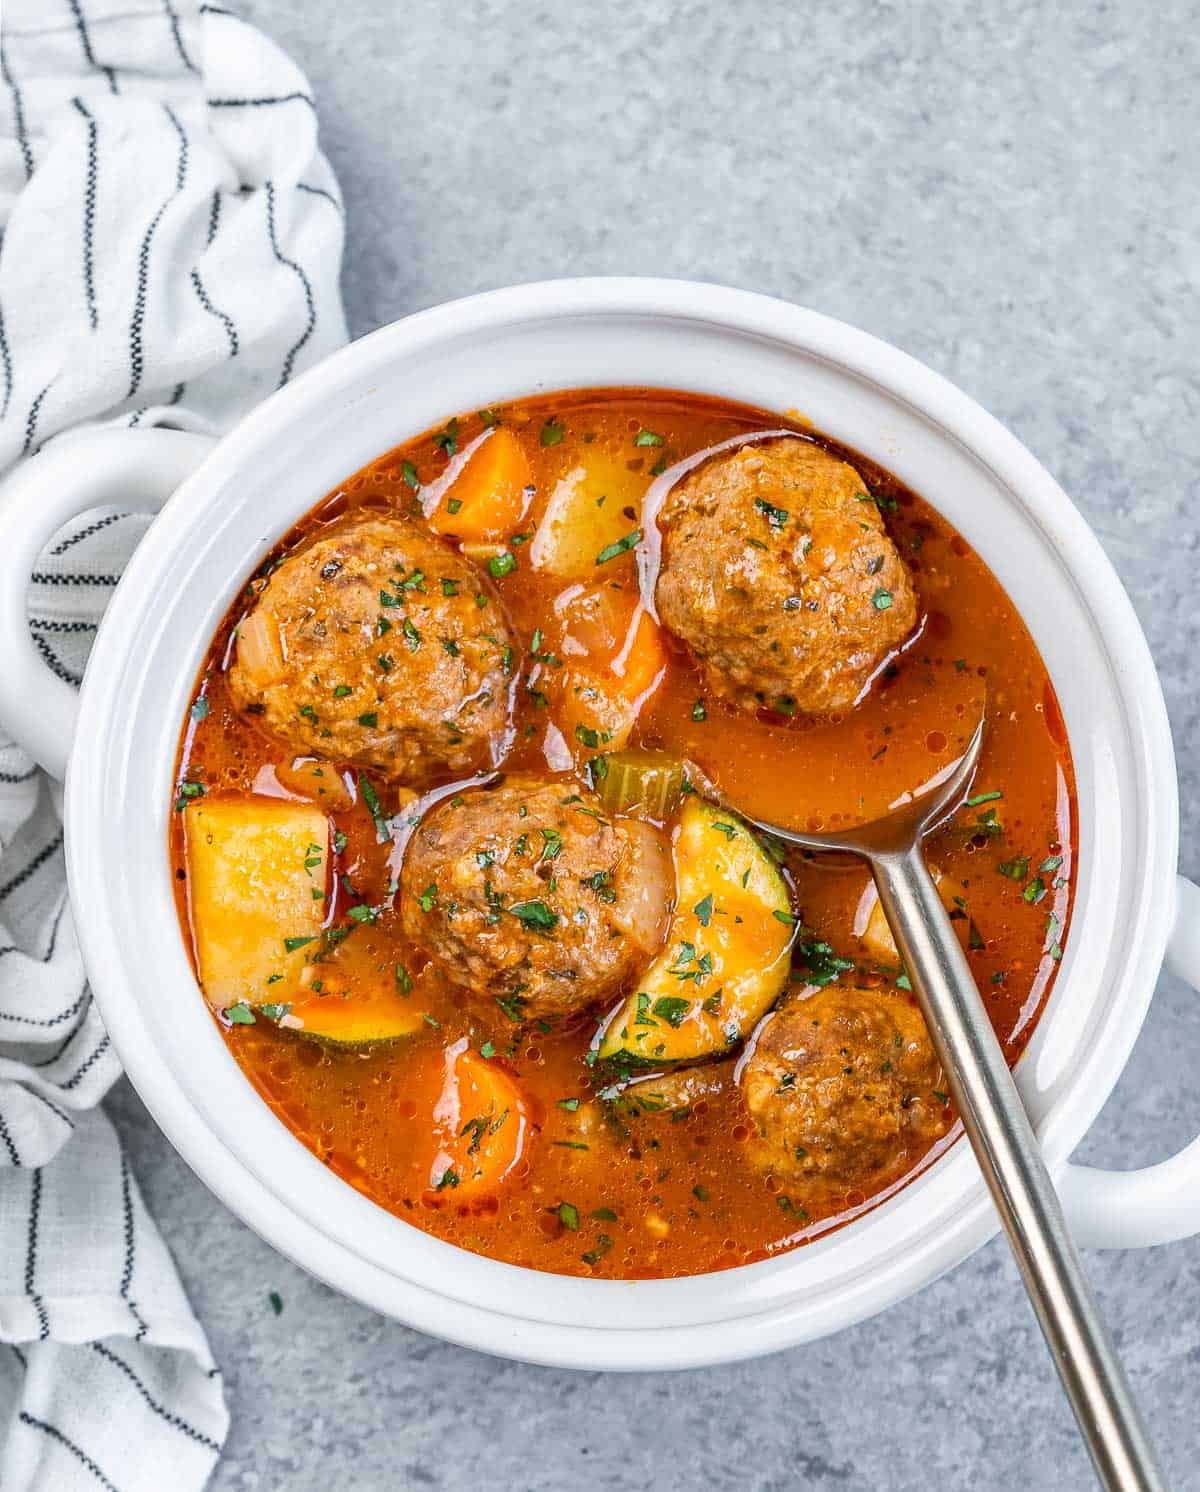 Spoon in a bowl of Albondigas Soup.